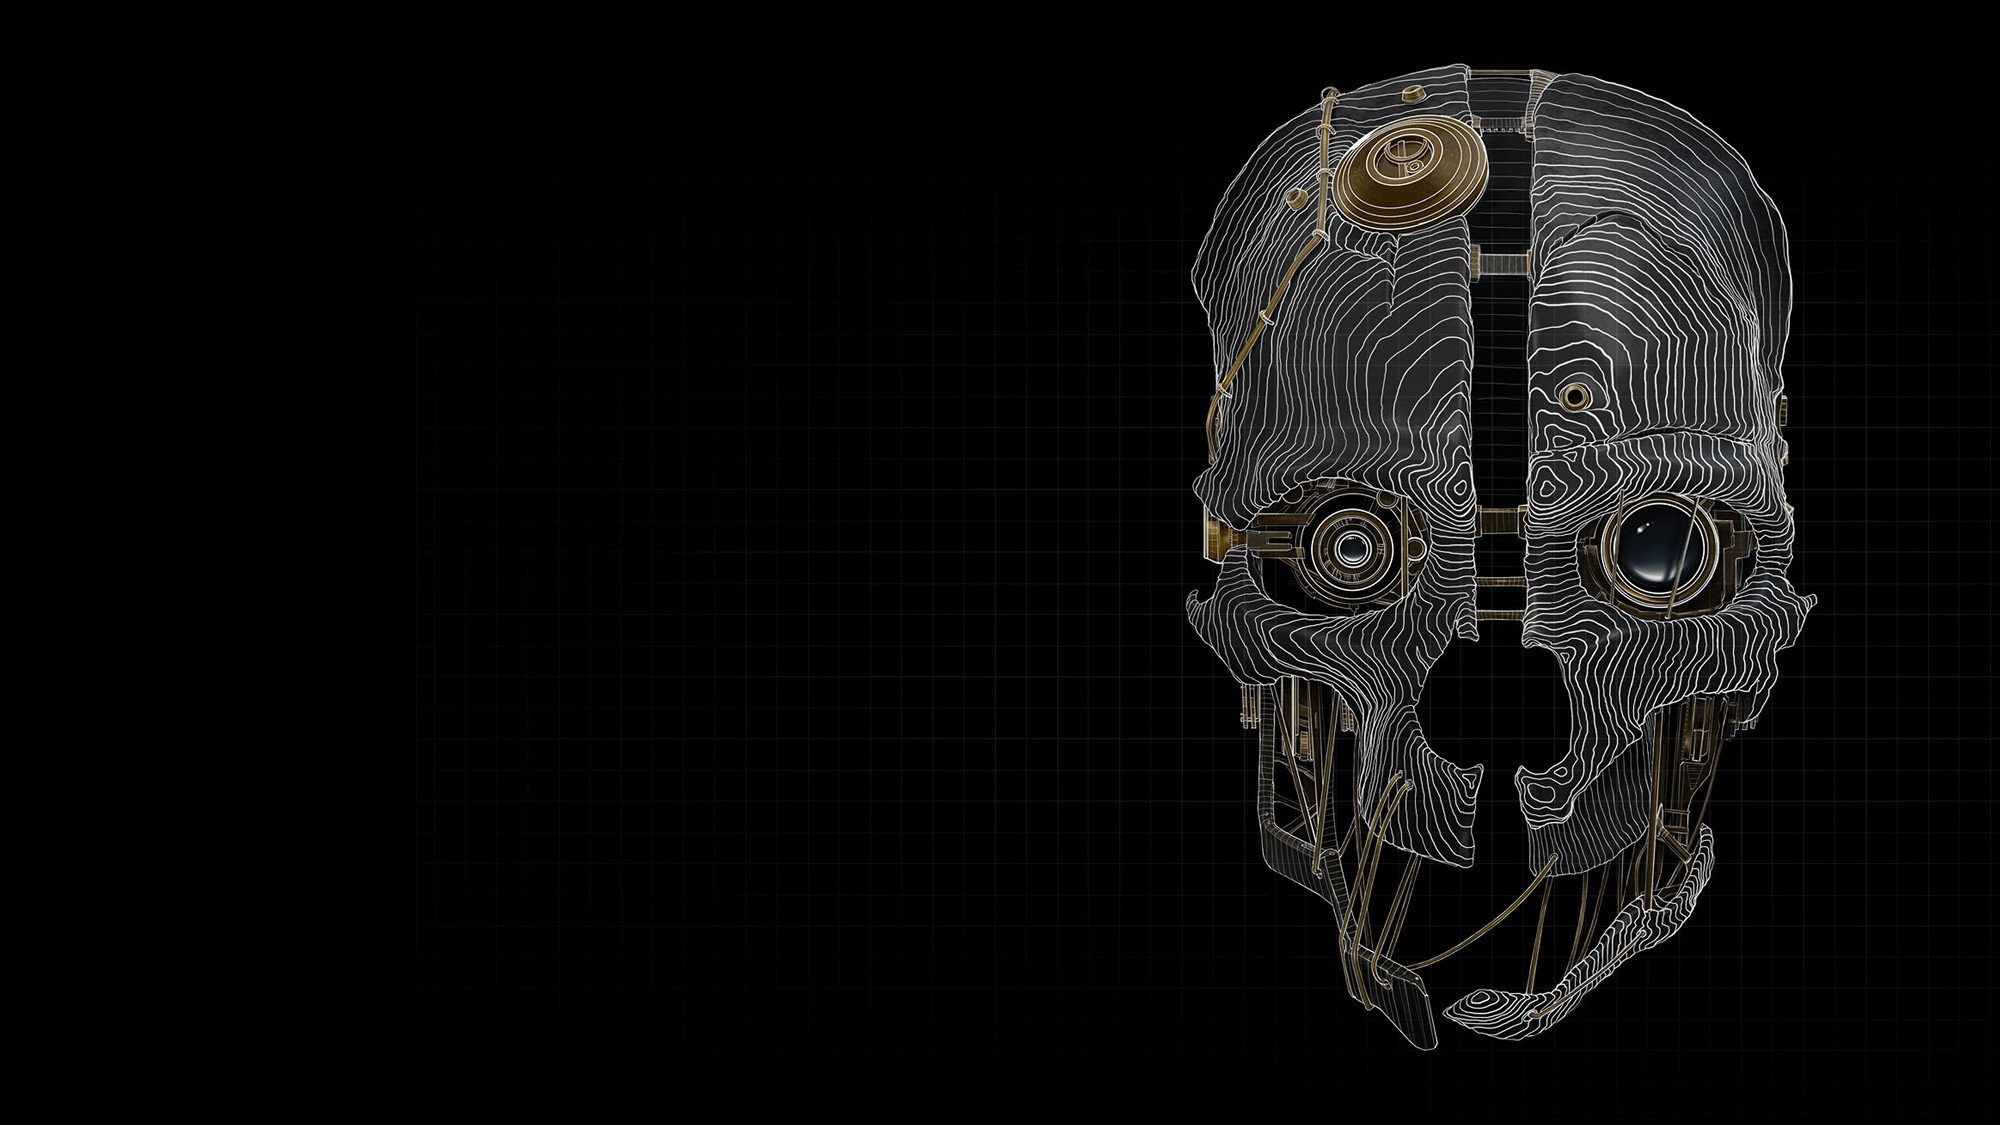 General 2000x1125 Dishonored video games Bethesda Softworks skull mask steampunk PC gaming black background simple background video game art